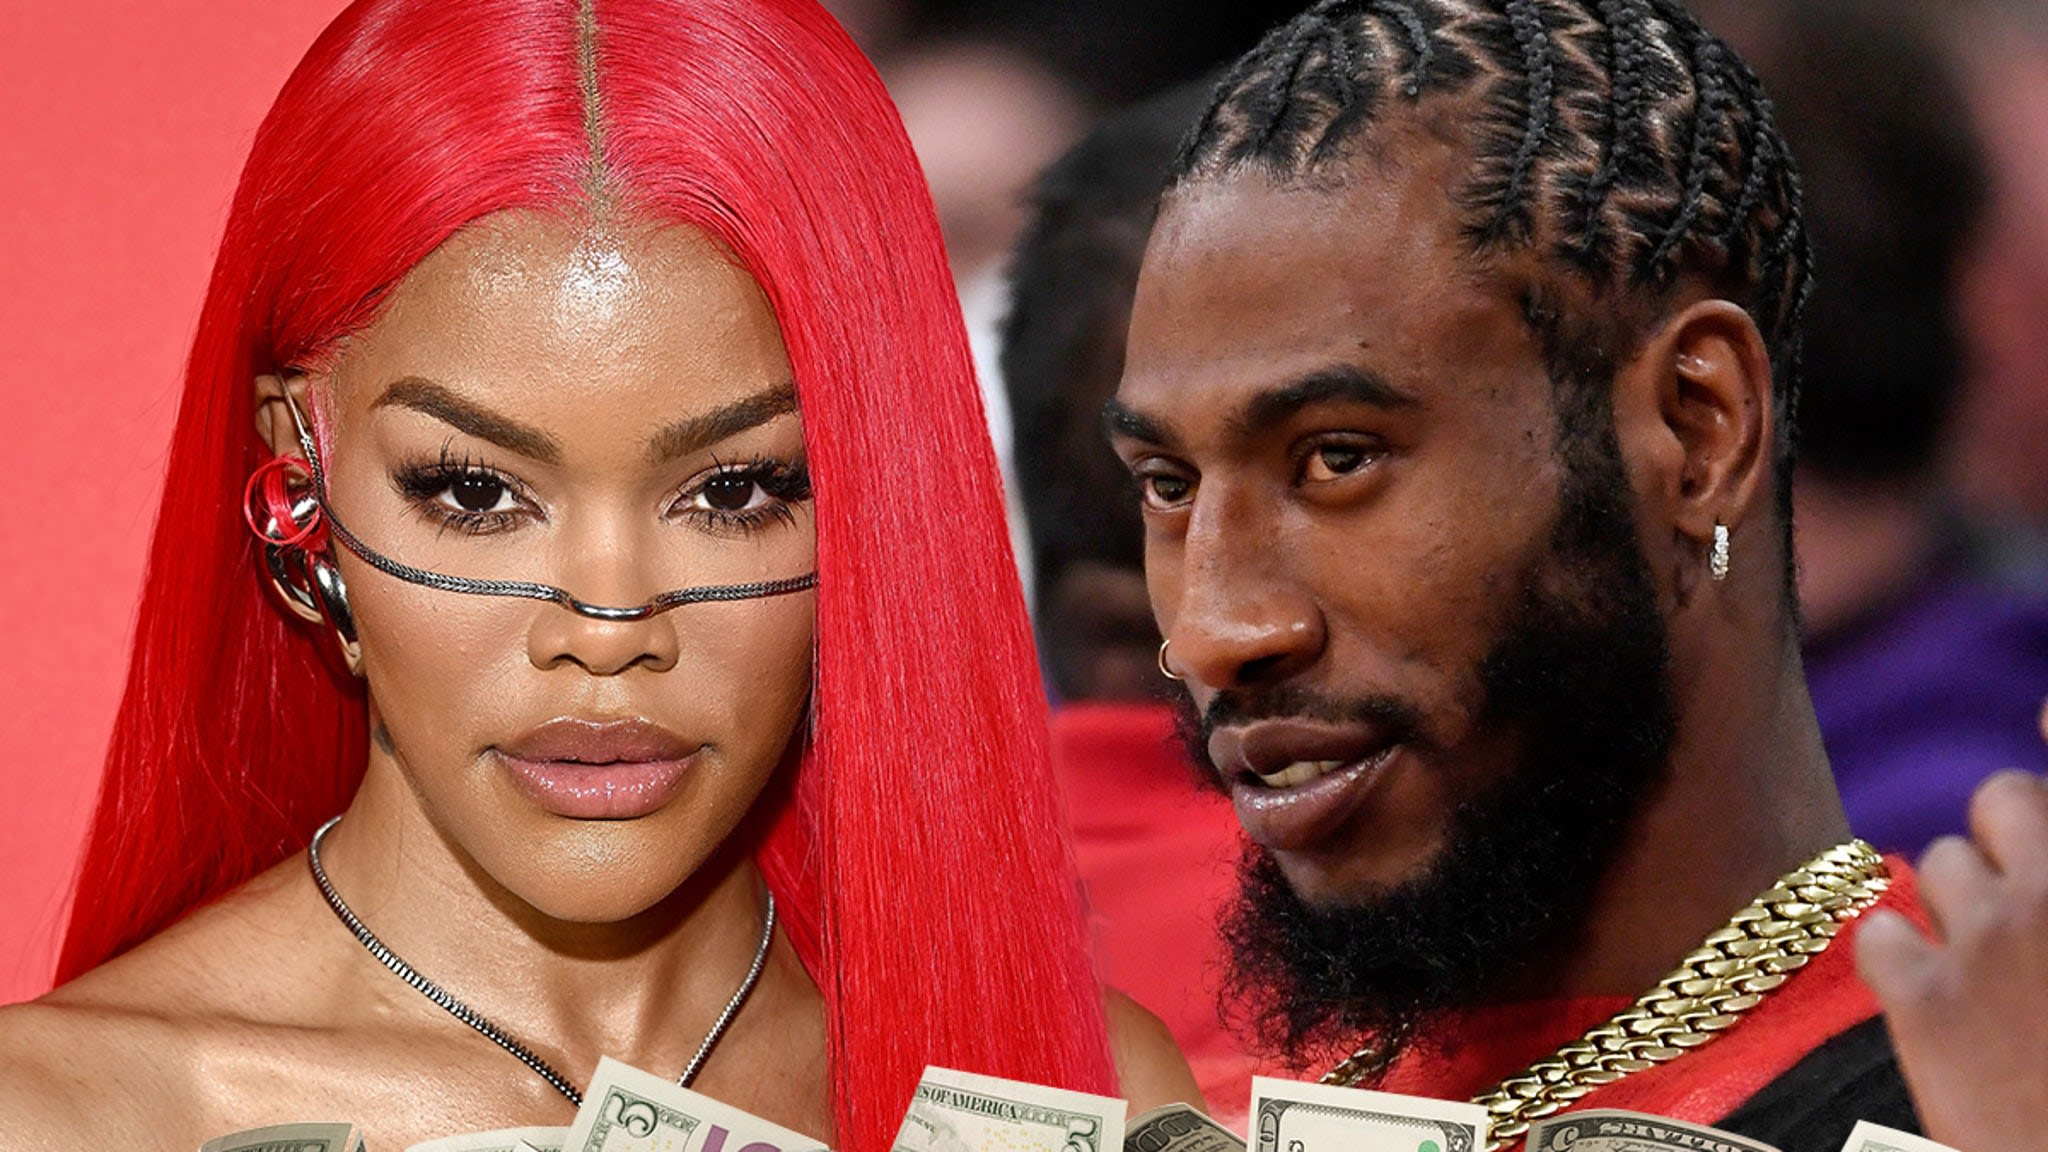 Teyana Taylor's Income Almost Twice Iman Shumpert's, So He Claims in Divorce